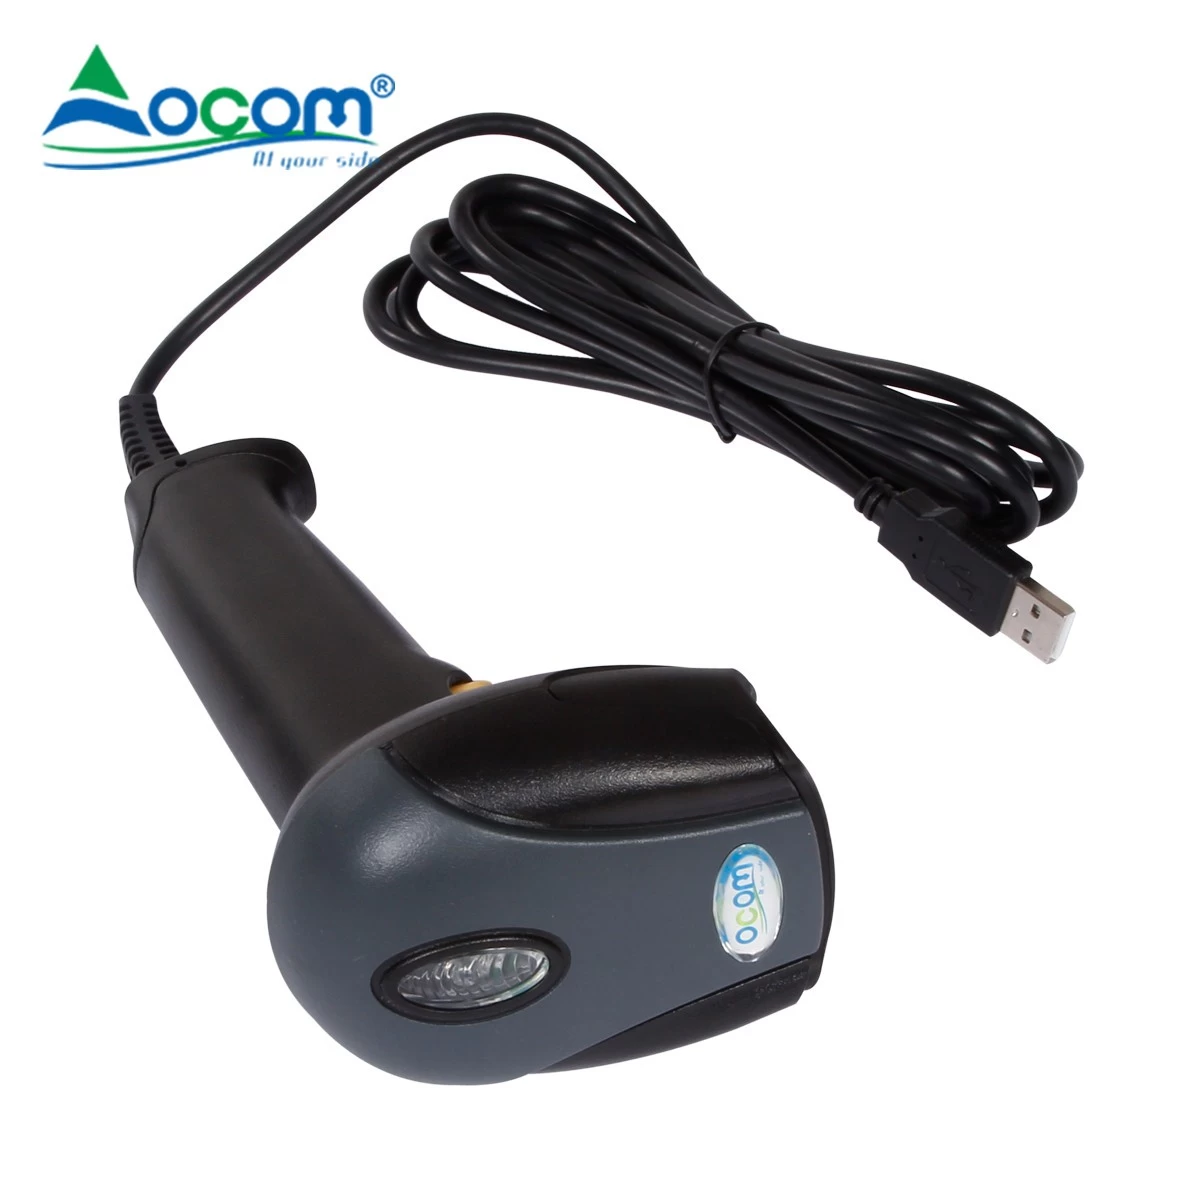 Bi-Directional Scan 32 bit CPU 260 Scan/s High Level Auto Sense Handheld Barcode Scanner With Stand